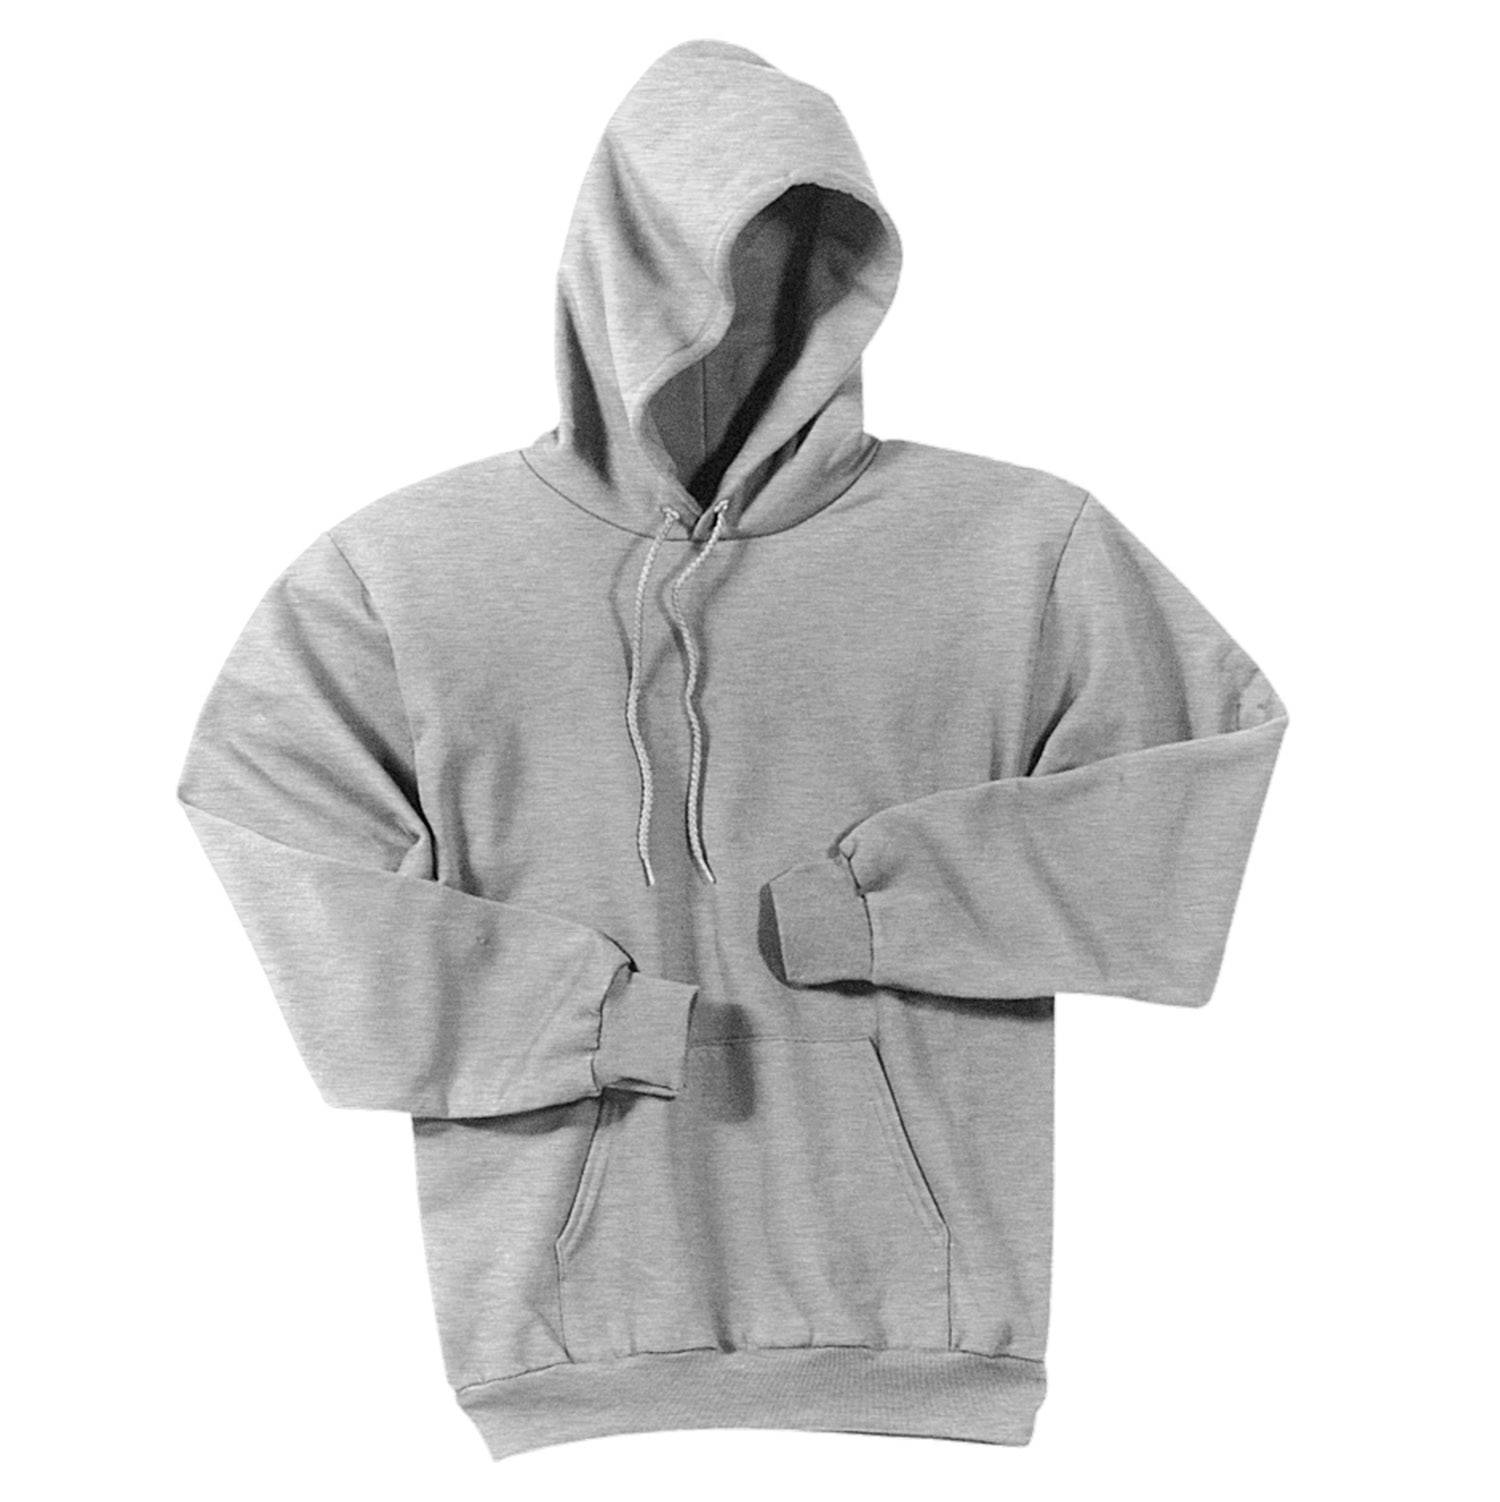 PORT AND COMPANY ULTIMATE PULLOVER HOODED SWEATSHIRT